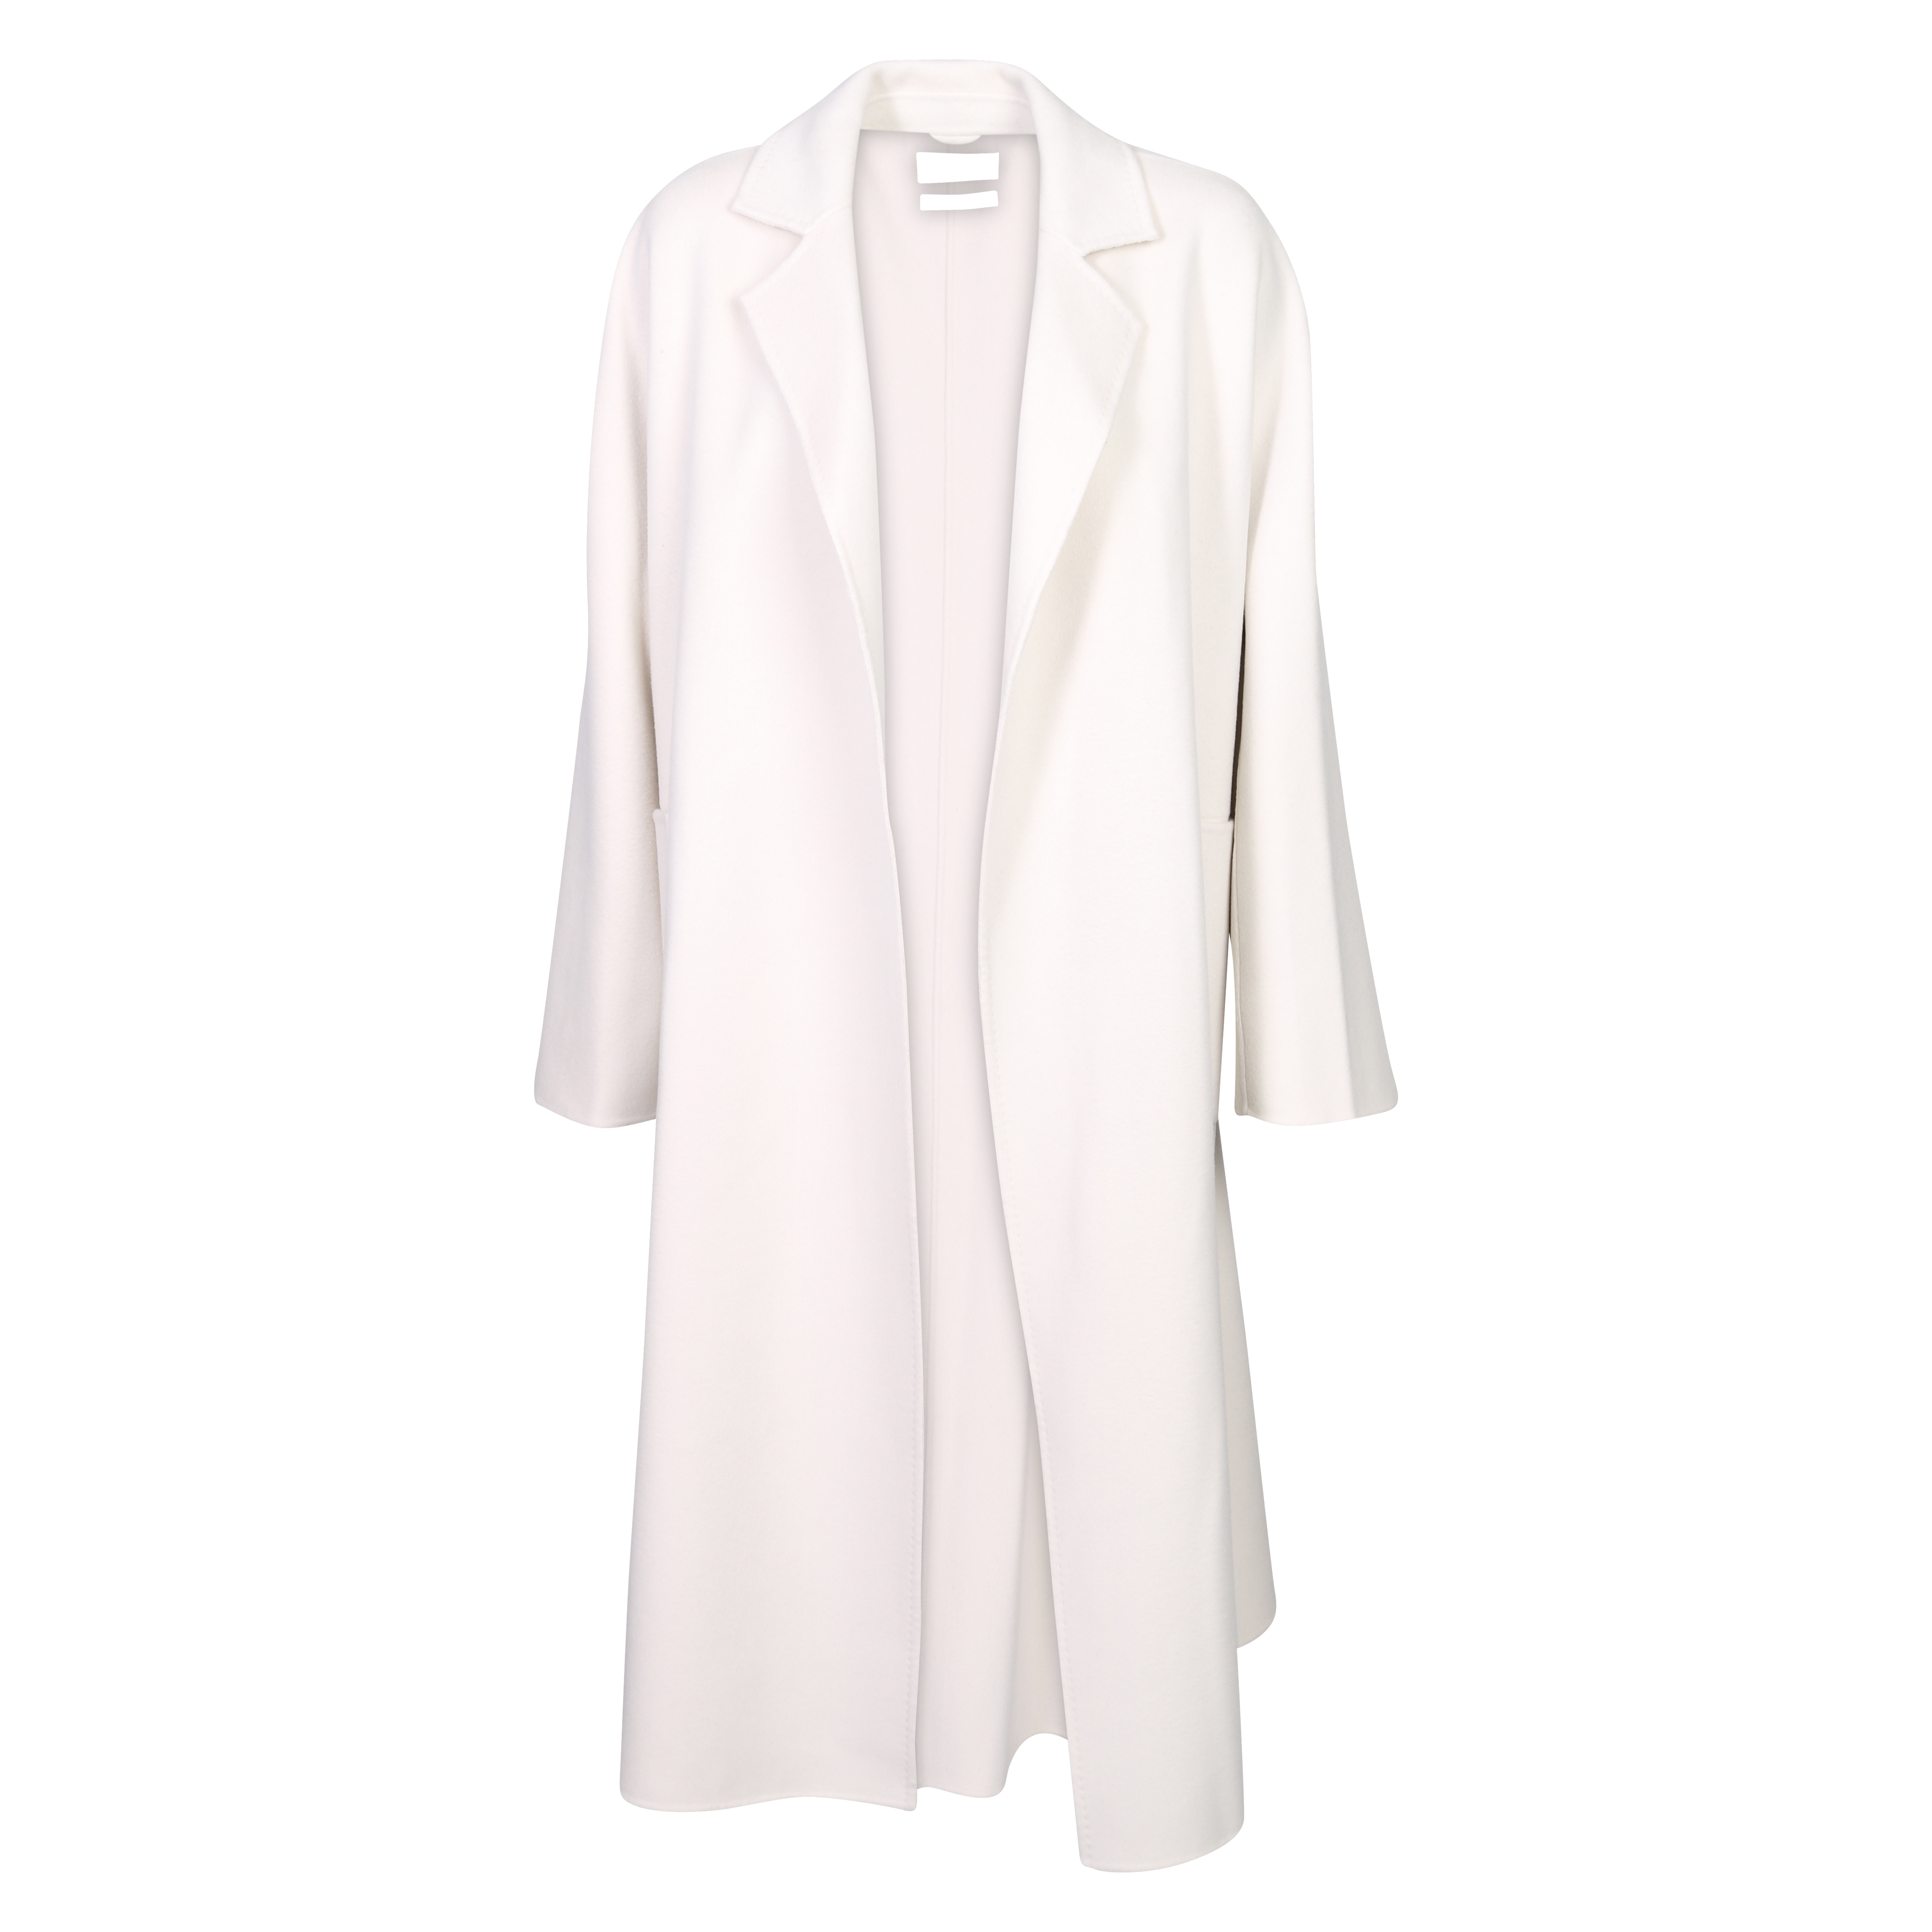 Flona Wool/Cashmere Coat in Offwhite XS/S